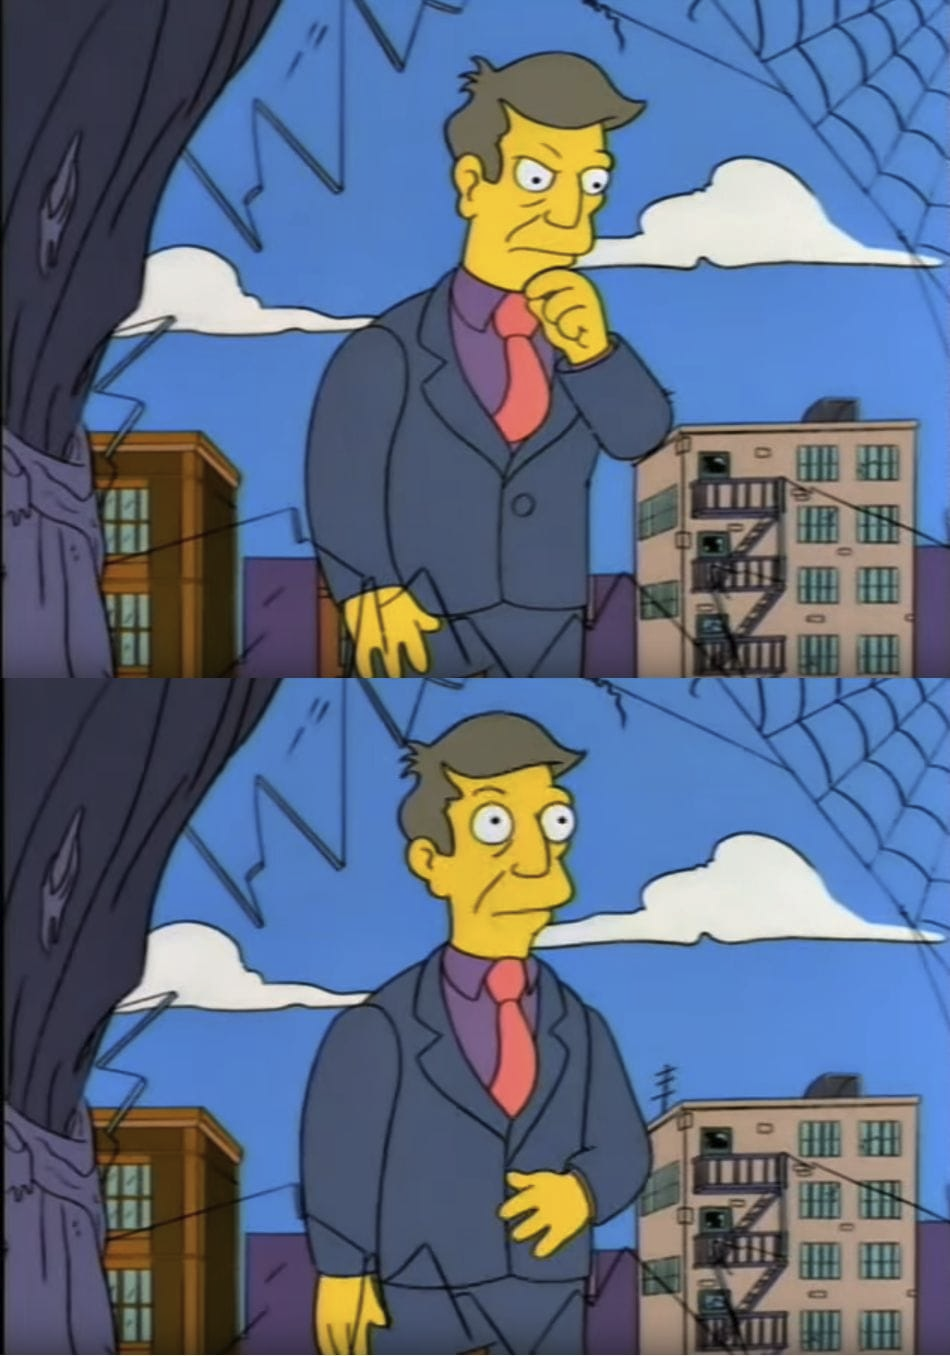 Seymour, could it be Blank Meme Template